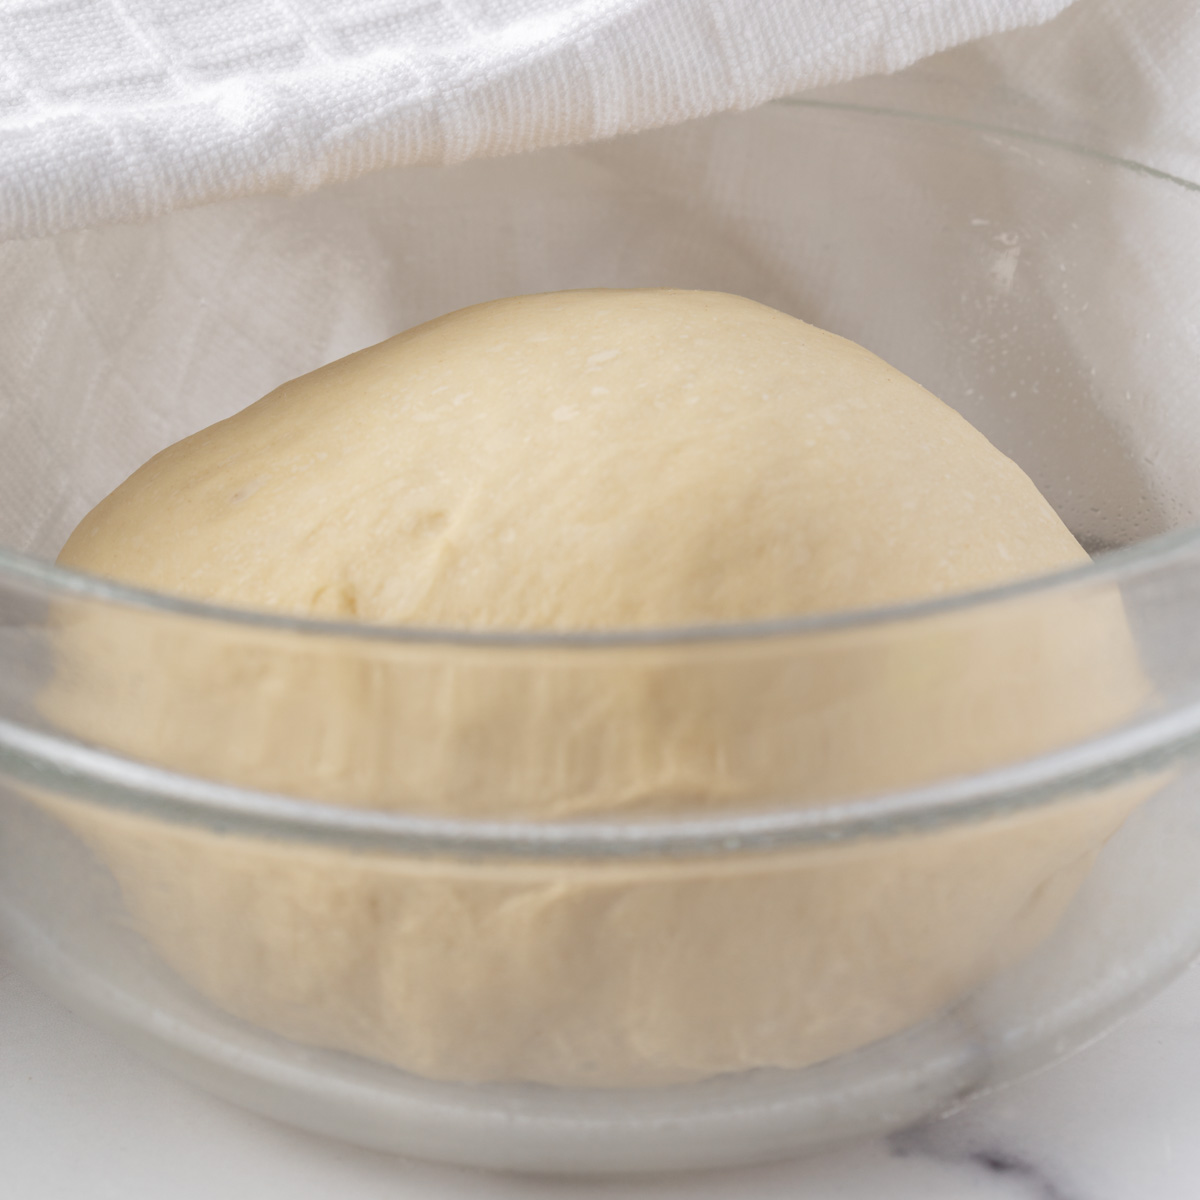 dough in a bowl waiting to rise